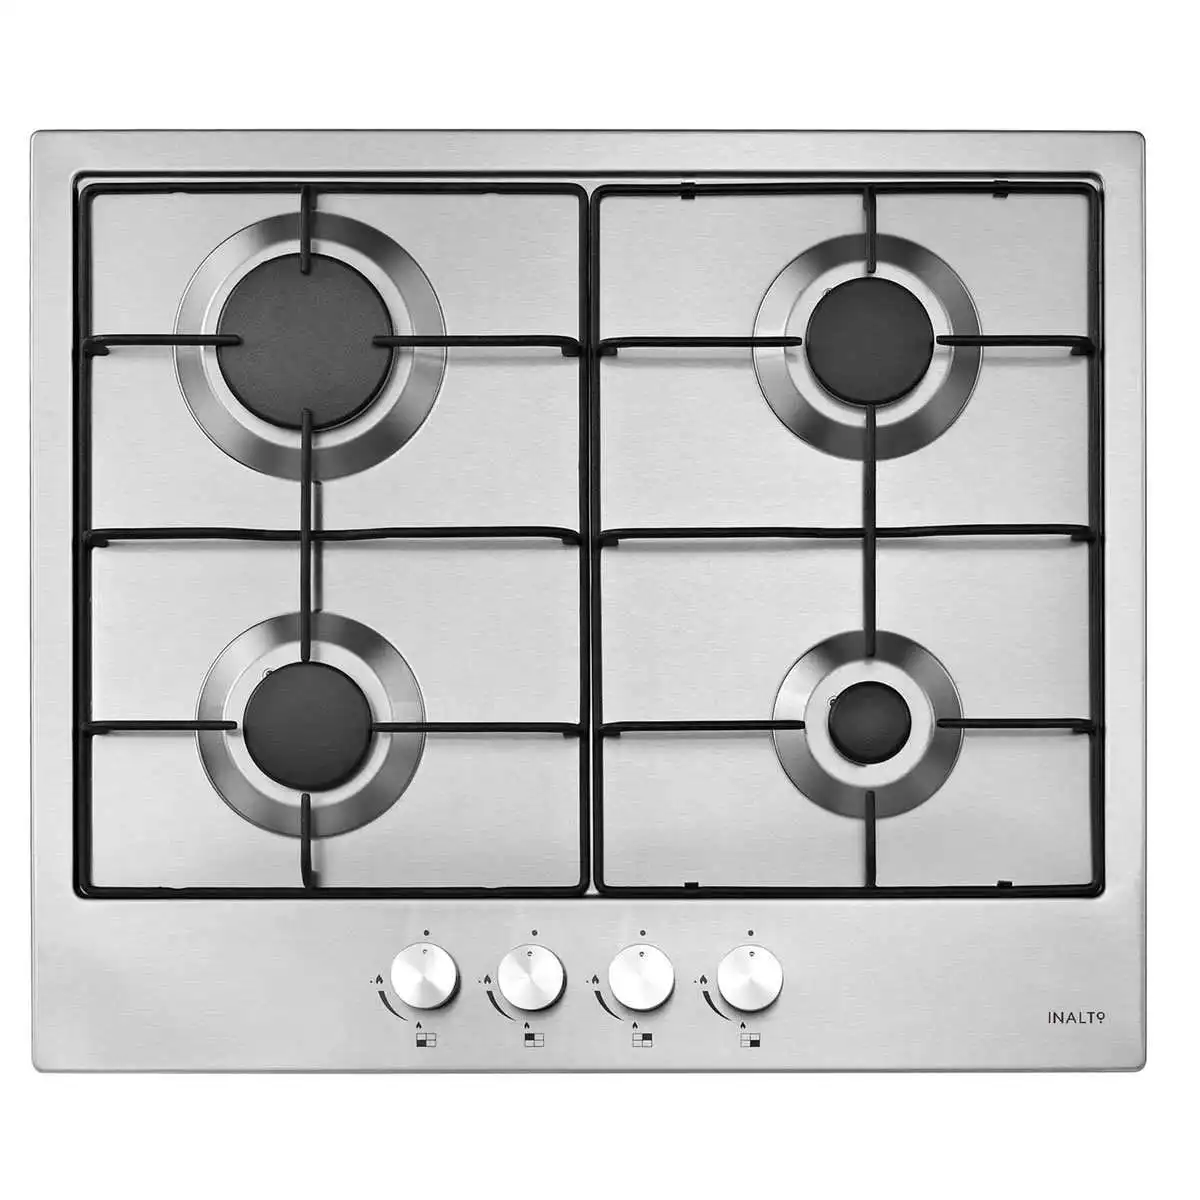 InAlto 60cm Stainless Steel Gas Cooktop ICG6F